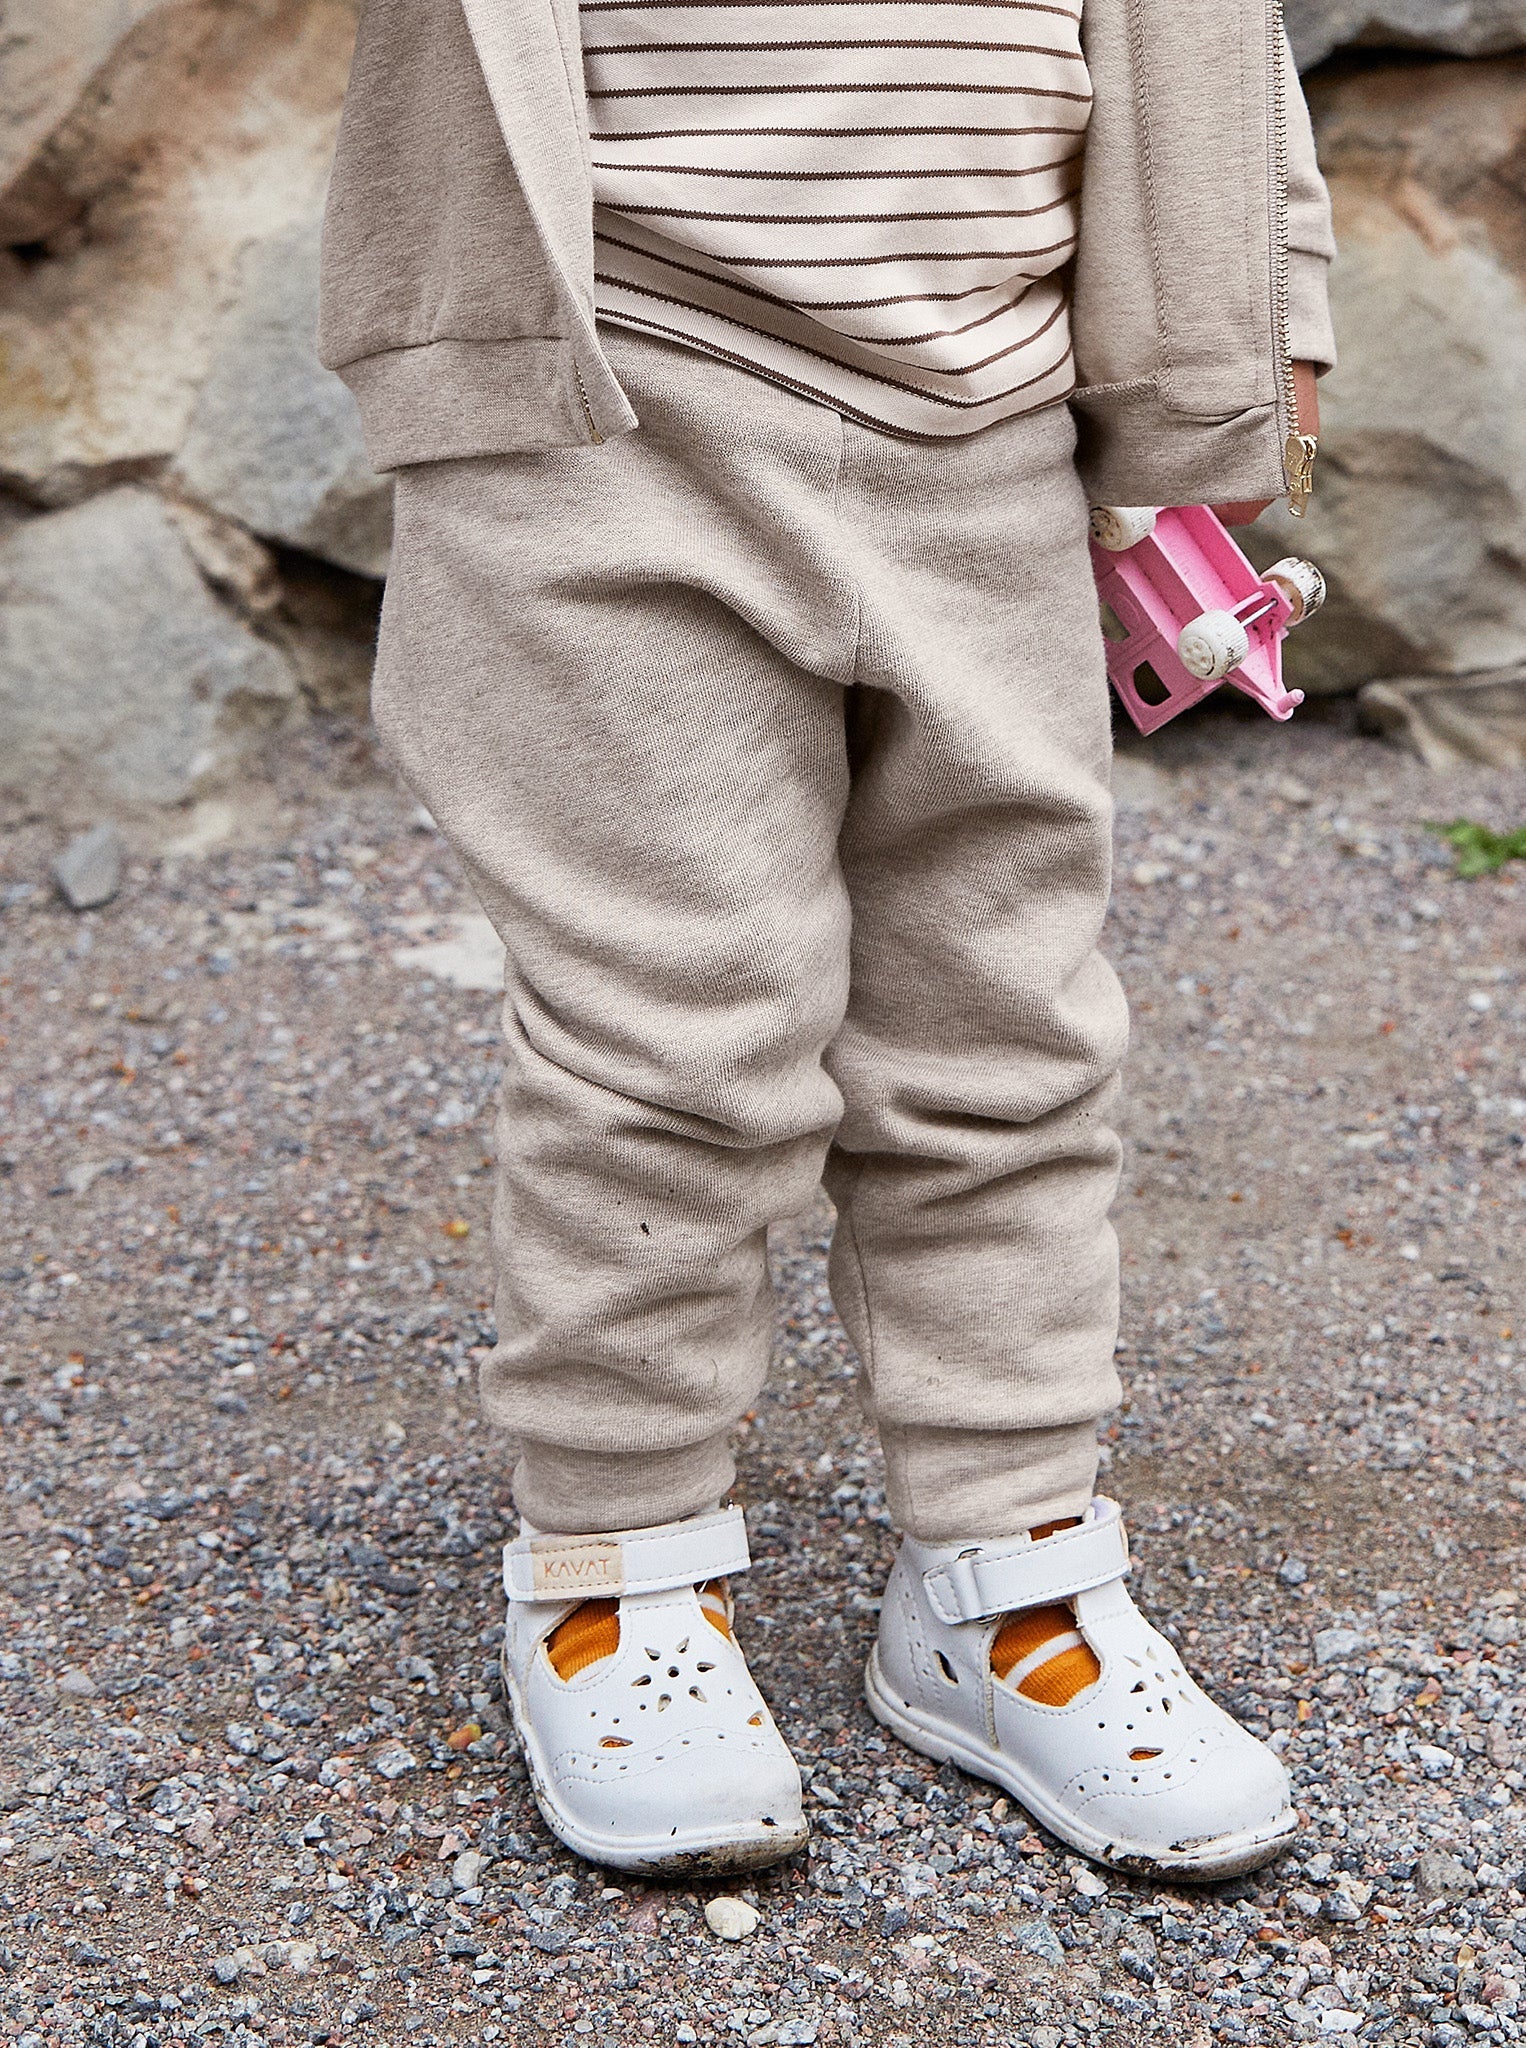 Organic Cotton Beige Baby Leggings from the Polarn O. Pyret Kidswear collection. Clothes made using sustainably sourced materials.